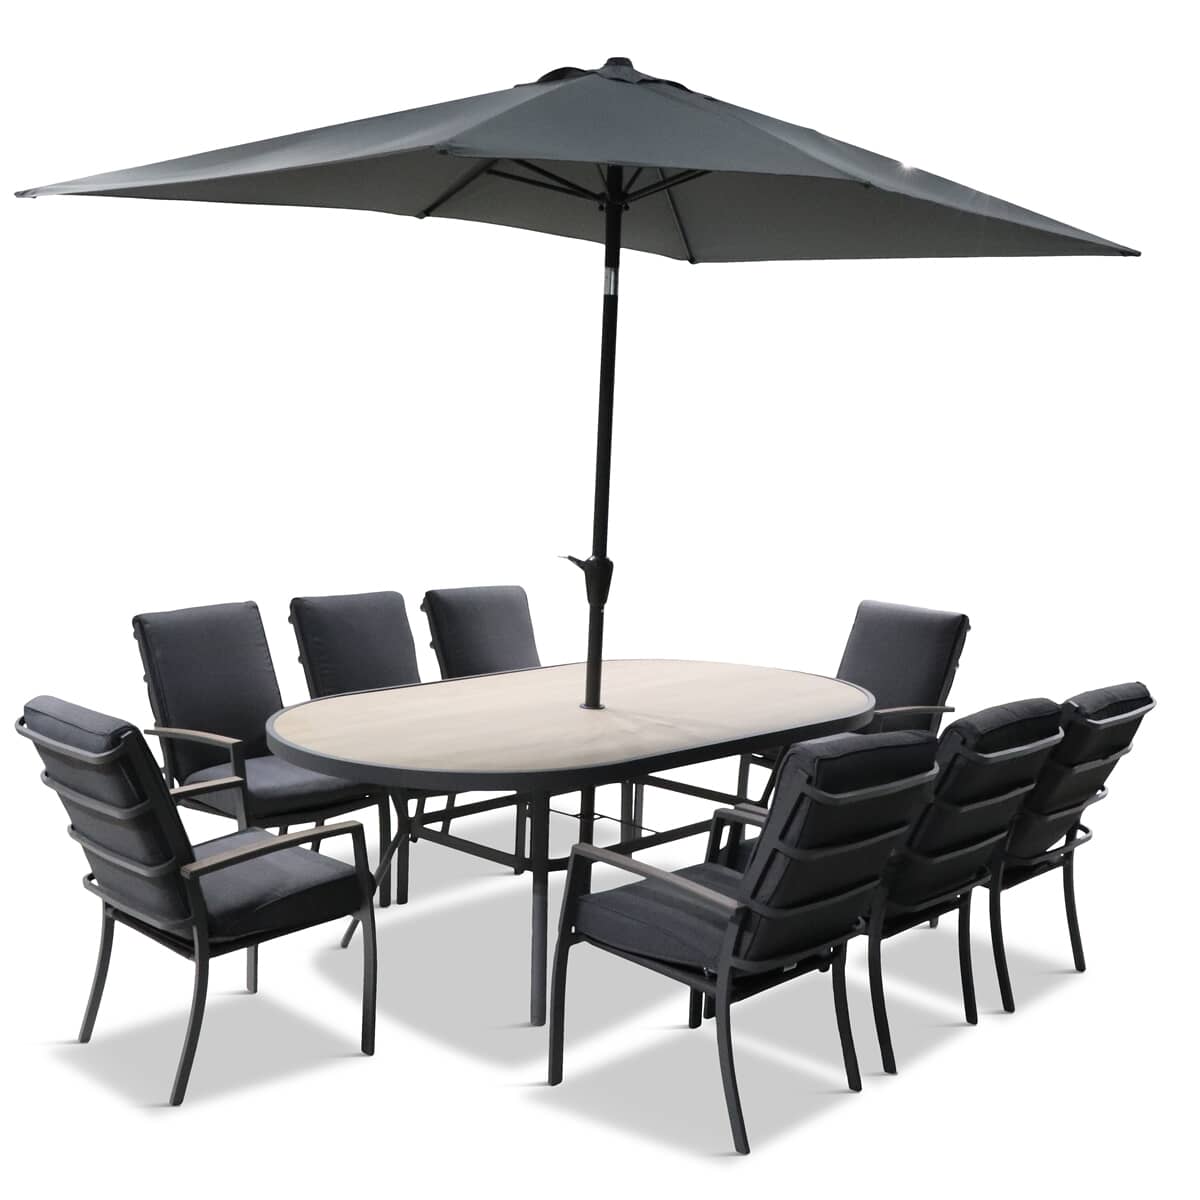 LG Outdoor Monza 8 Seat Dining Set with Lazy Susan Highback Armchairs and 2 x 3m Parasol